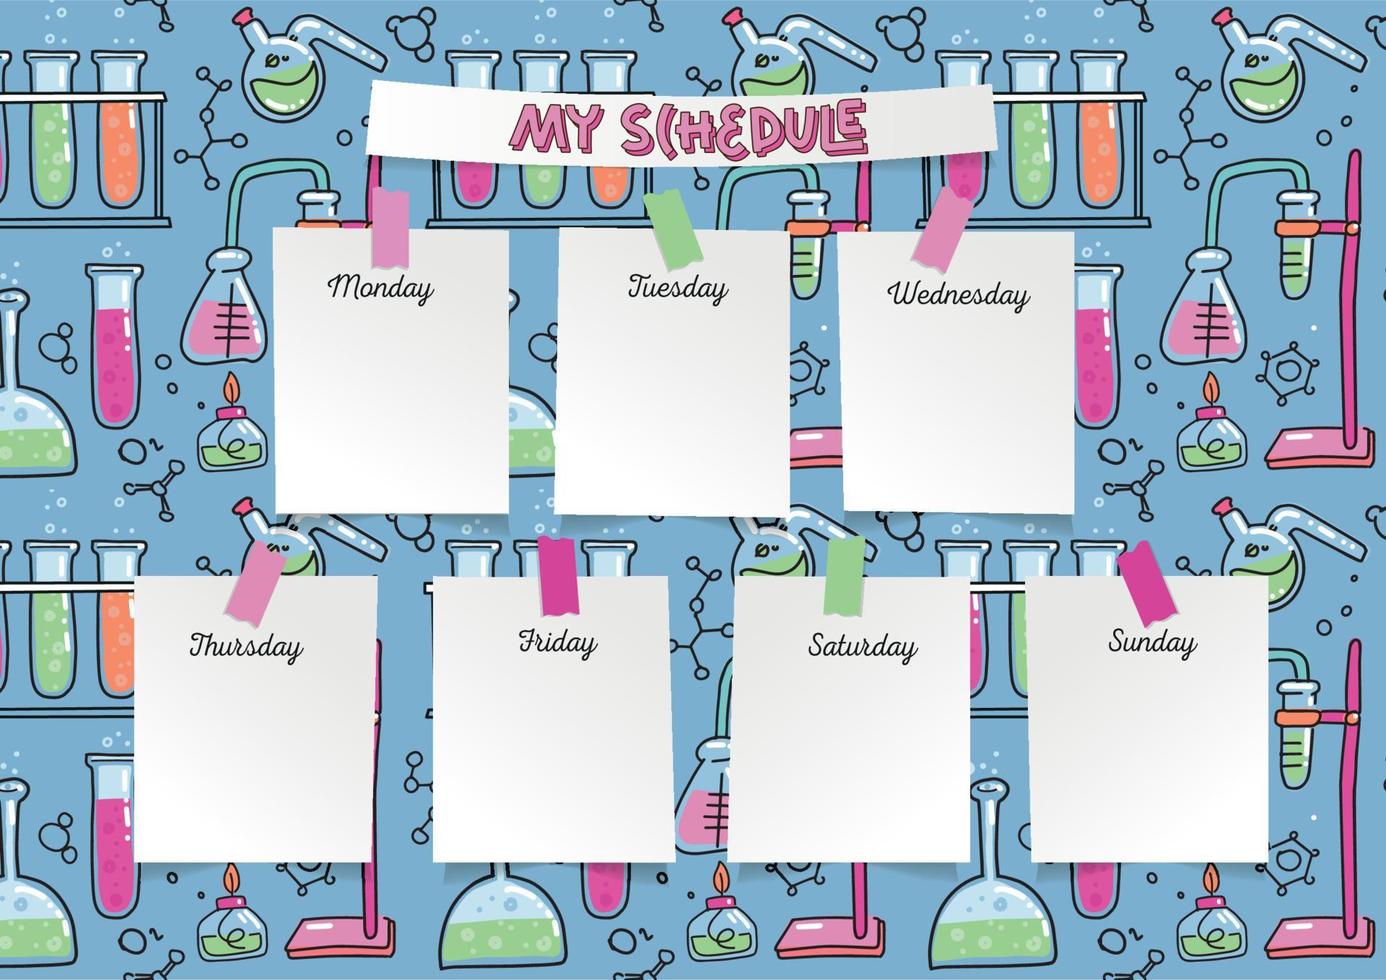 My schedule template with school science supplies in a doodle style. Microscope, test tube, planner notebook and books on a blue background.Hand drawn vector illustration. A4 CMYK printable template.